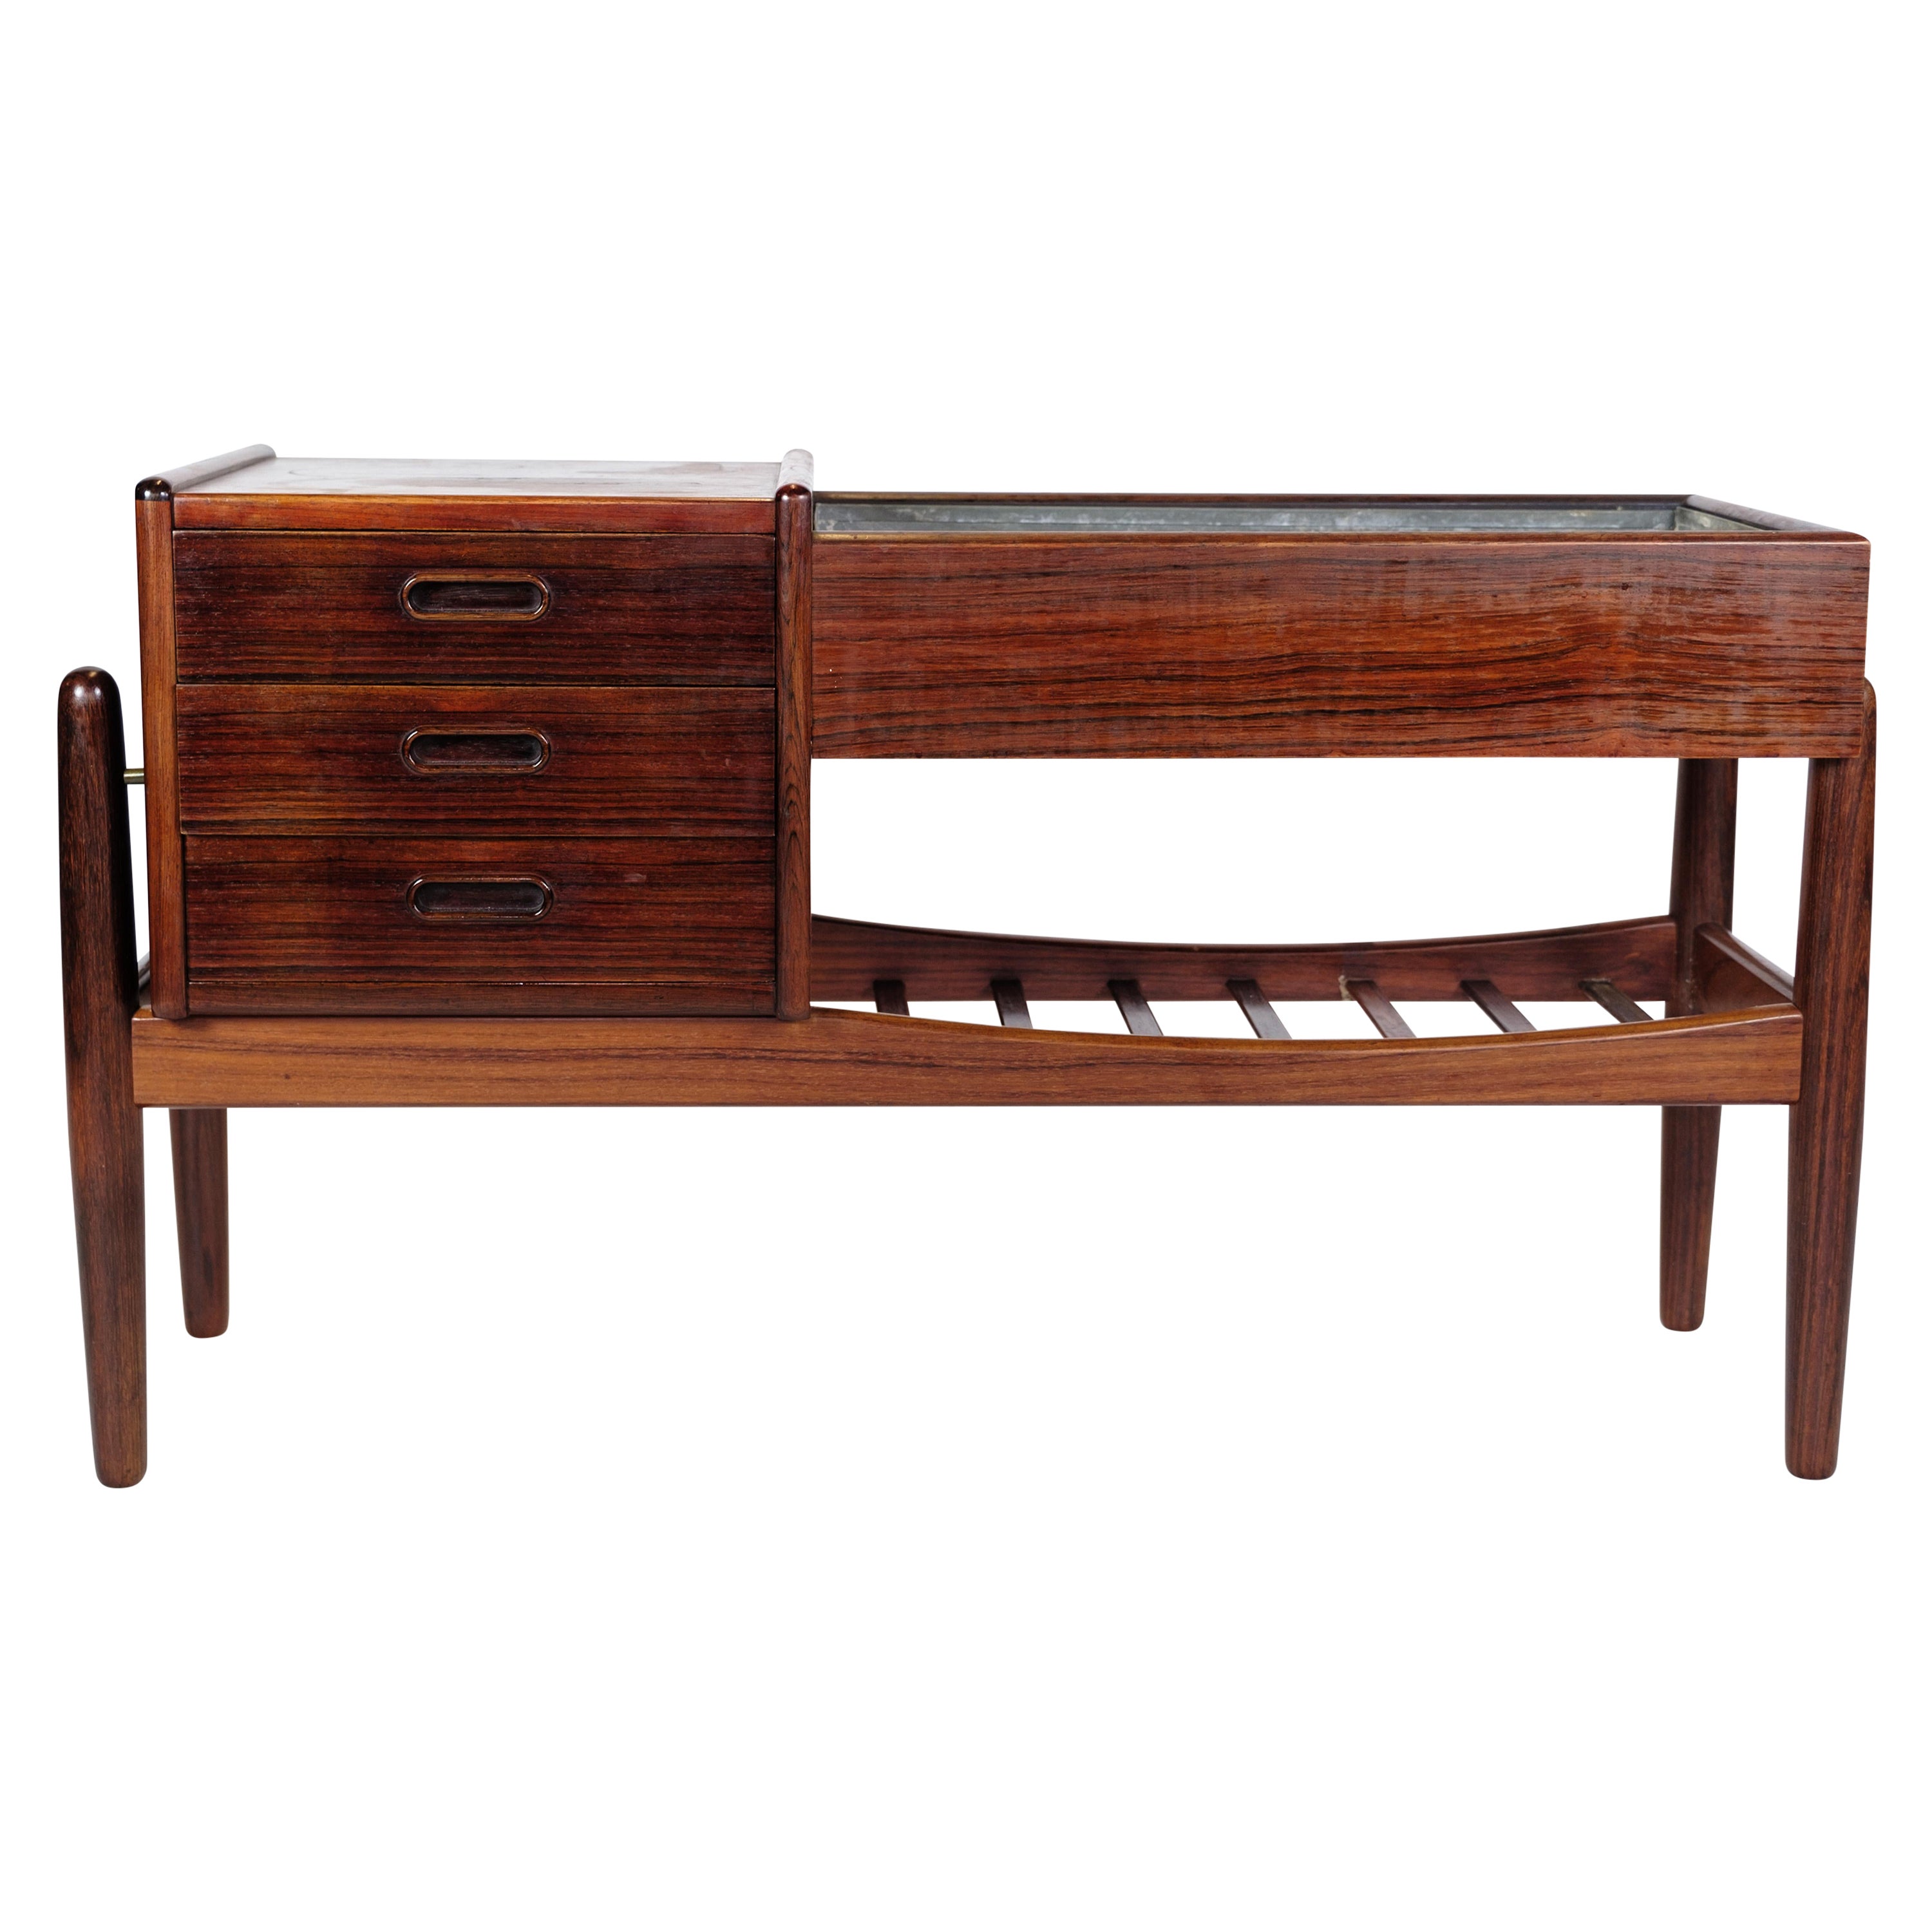 Planter in Rosewood Model 26 by Arne Wahl Iversen From 1959